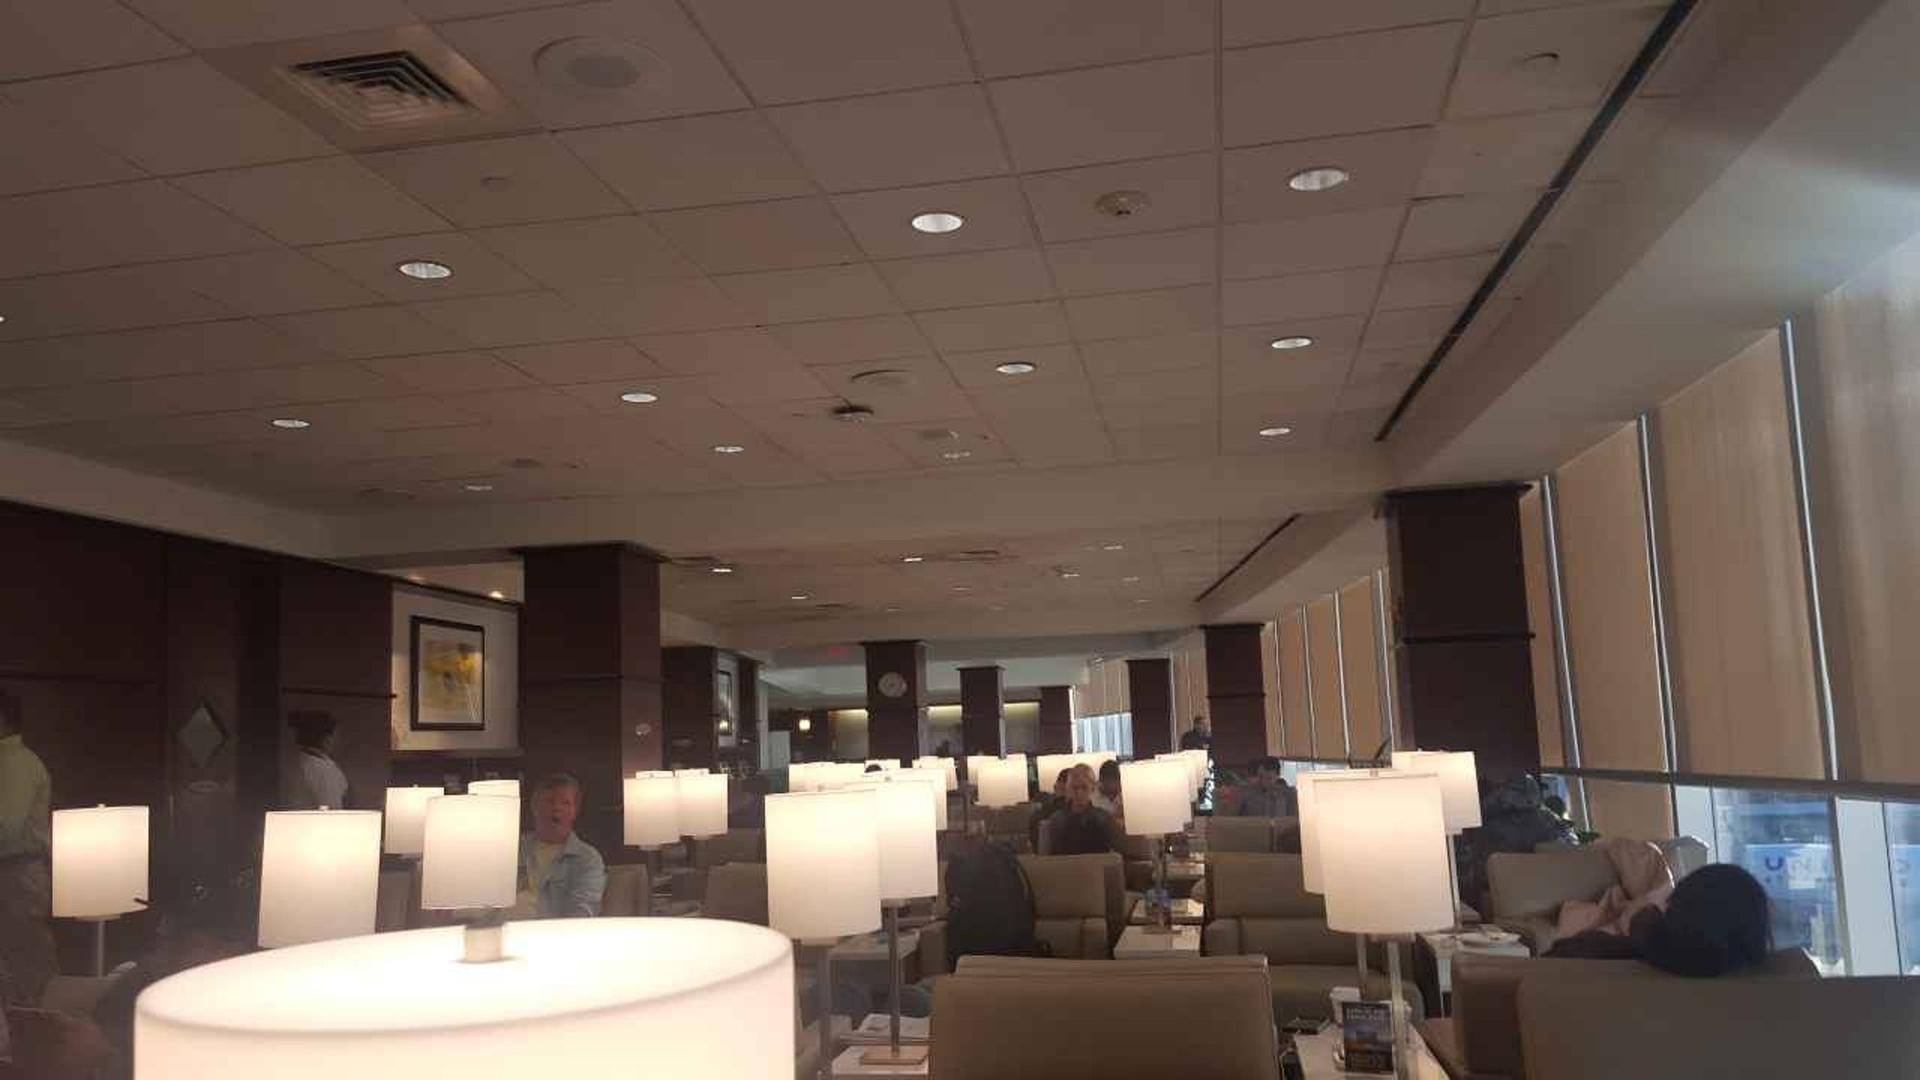 United Airlines United Club image 1 of 2